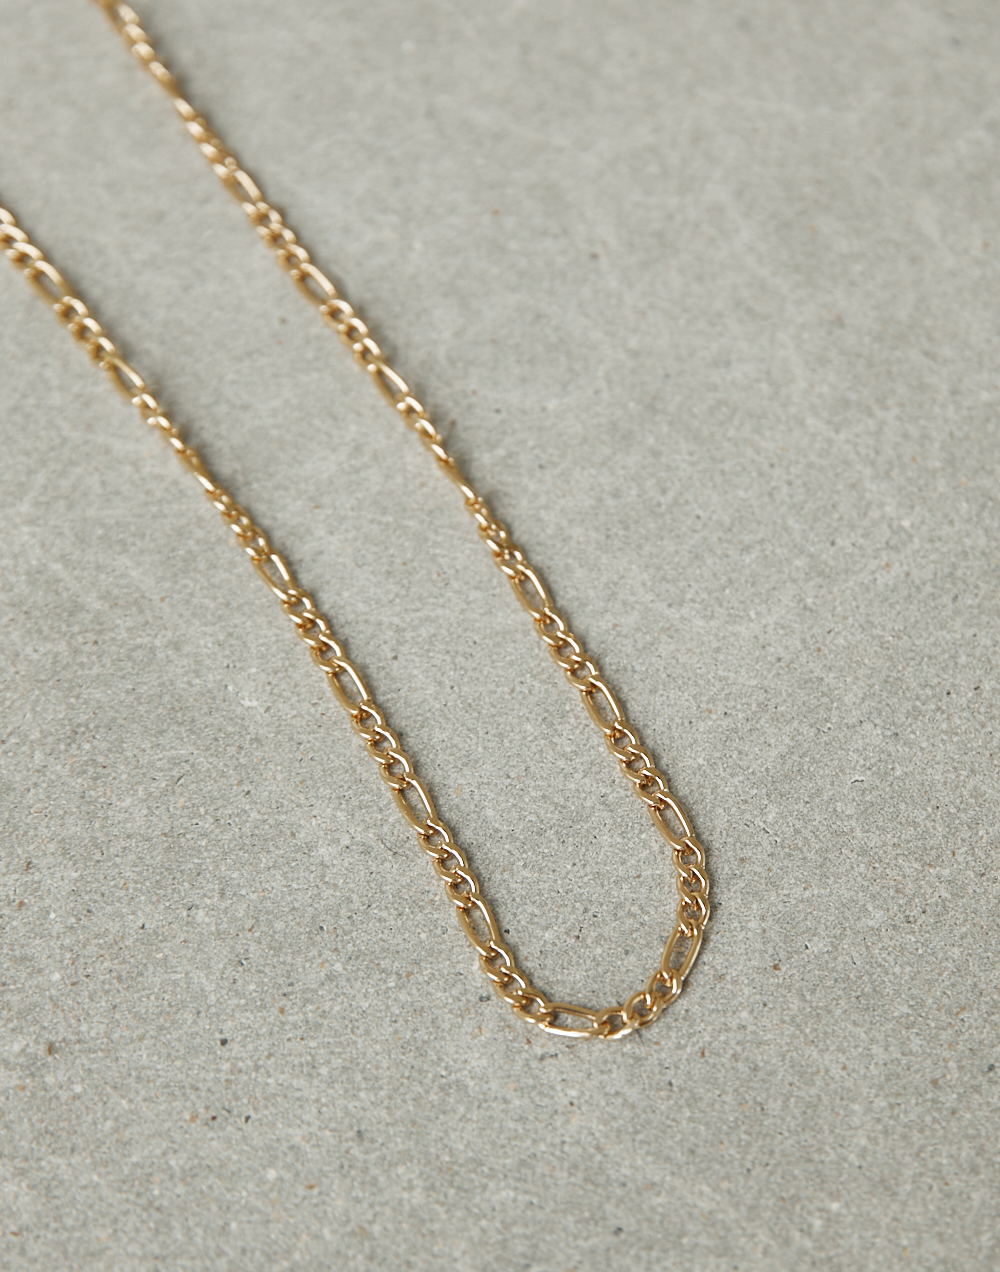 Menzies Necklace (Gold) - Gold Chain Necklace - Women's Accessories - Charcoal Clothing